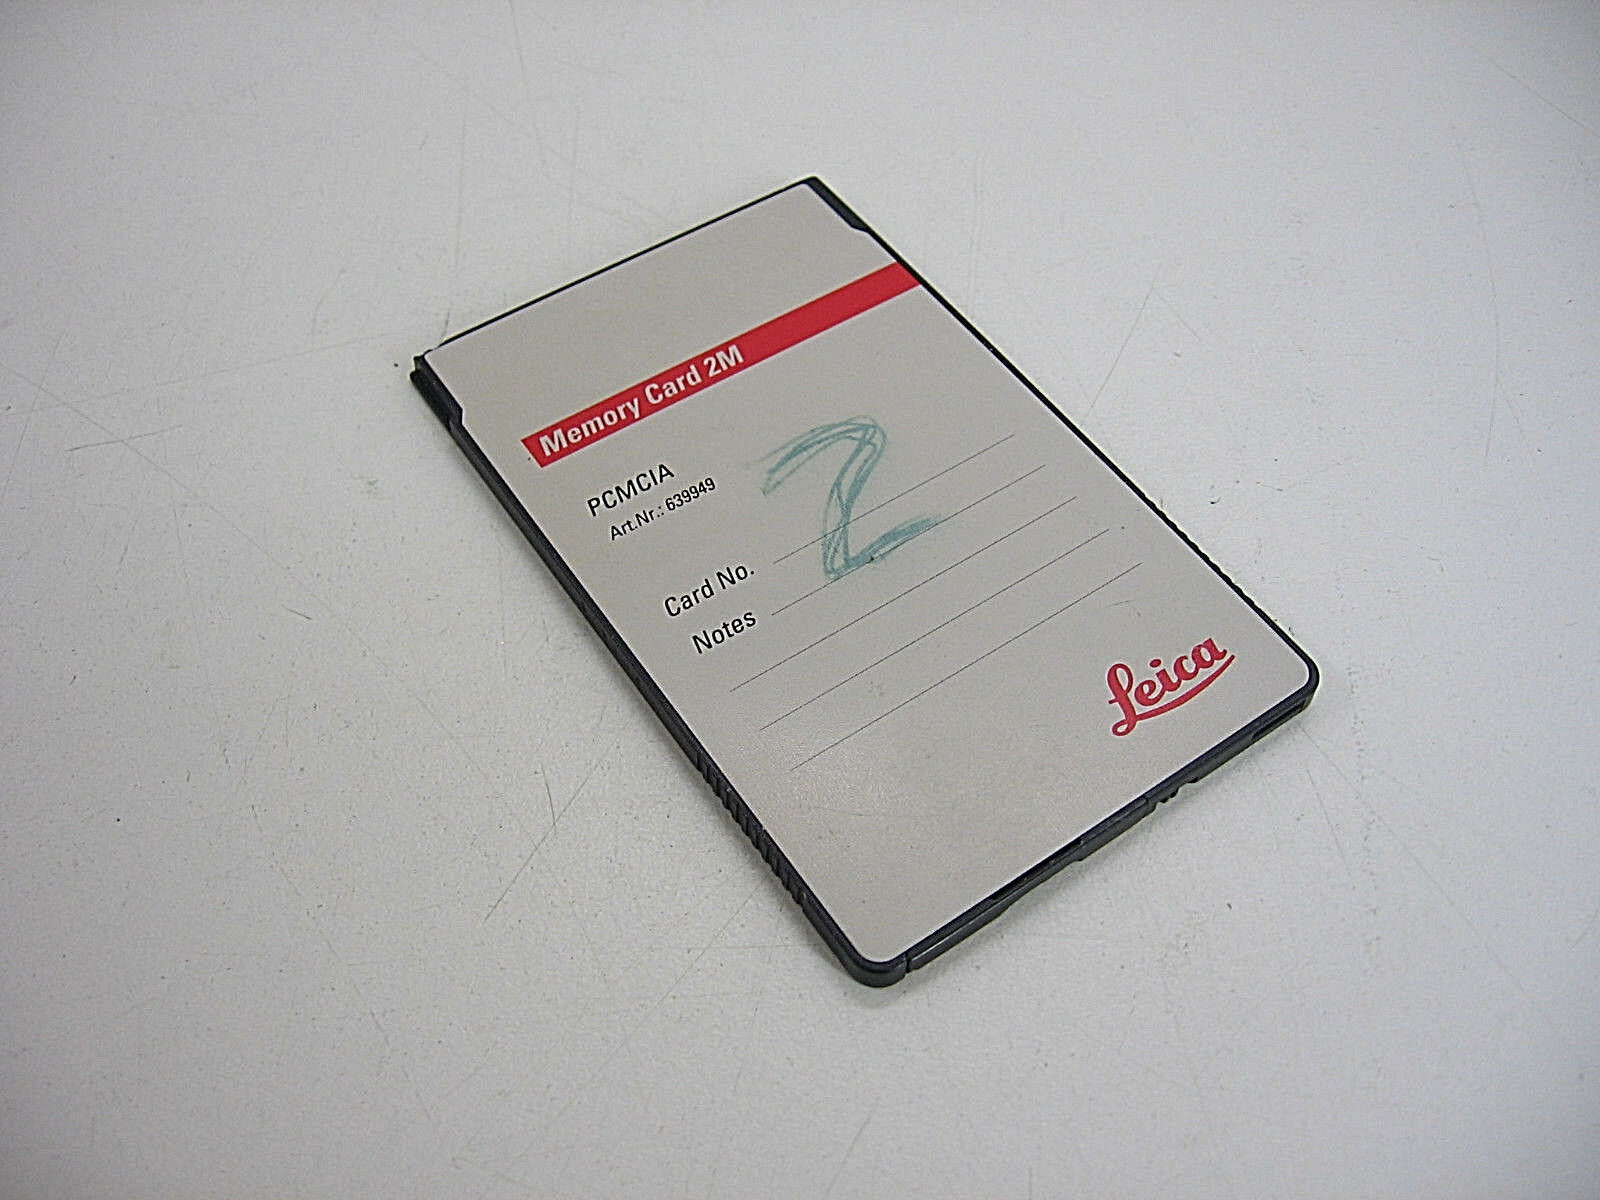 LEICA PCMCIA MEMORY CARD 2M ART NO.:639949 FOR SURVEYING TOTAL STATION